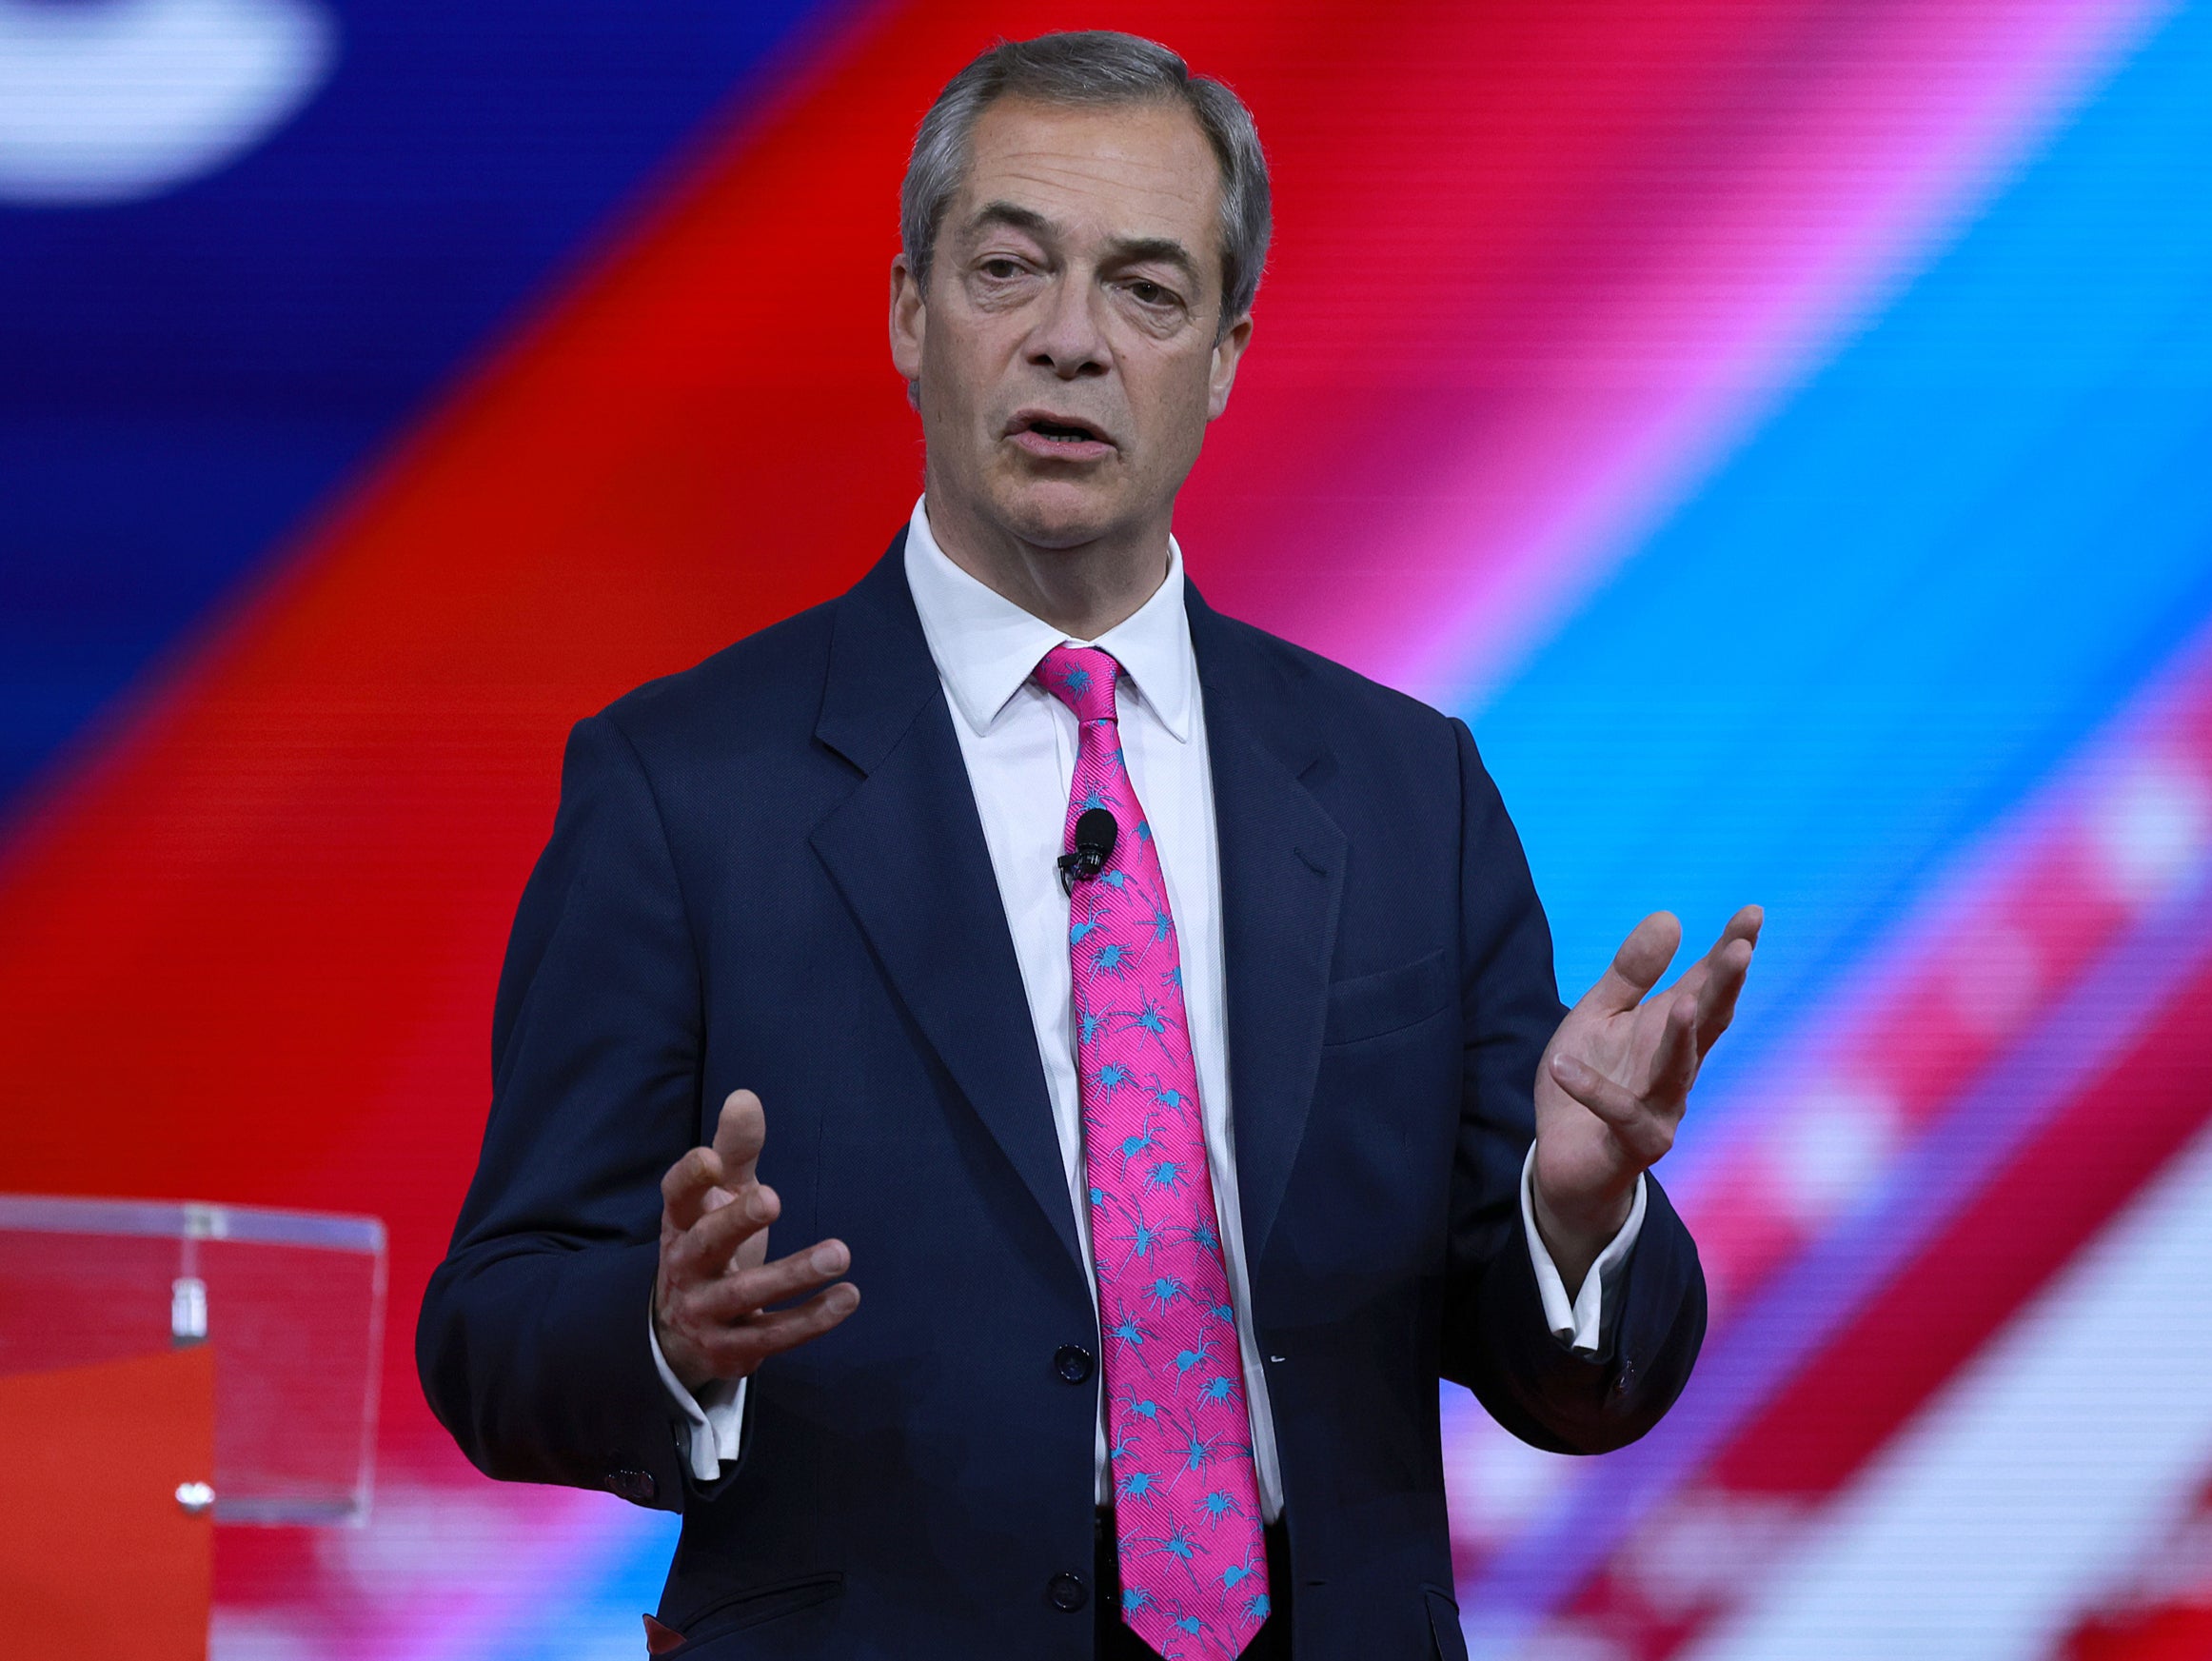 Farage has said that a ‘high-end’ institution closed his account without explanation